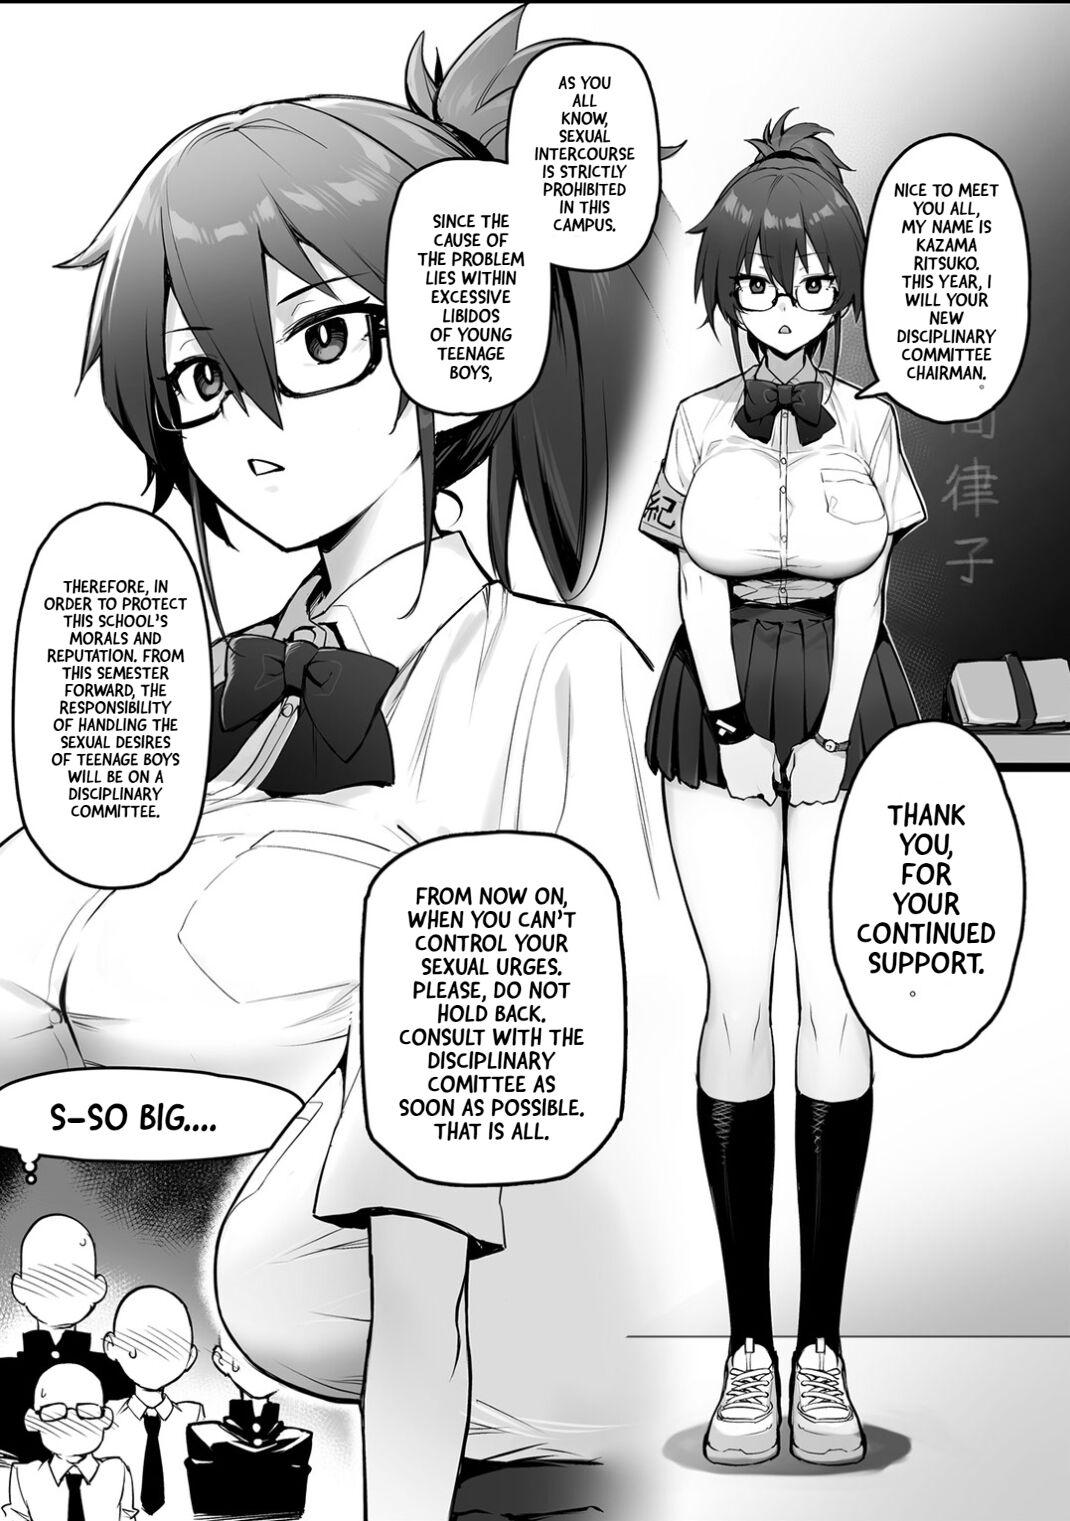 Sexcam Rumor Has It That The New Chairman of Disciplinary Committee Has Huge Breasts. Culo - Page 7